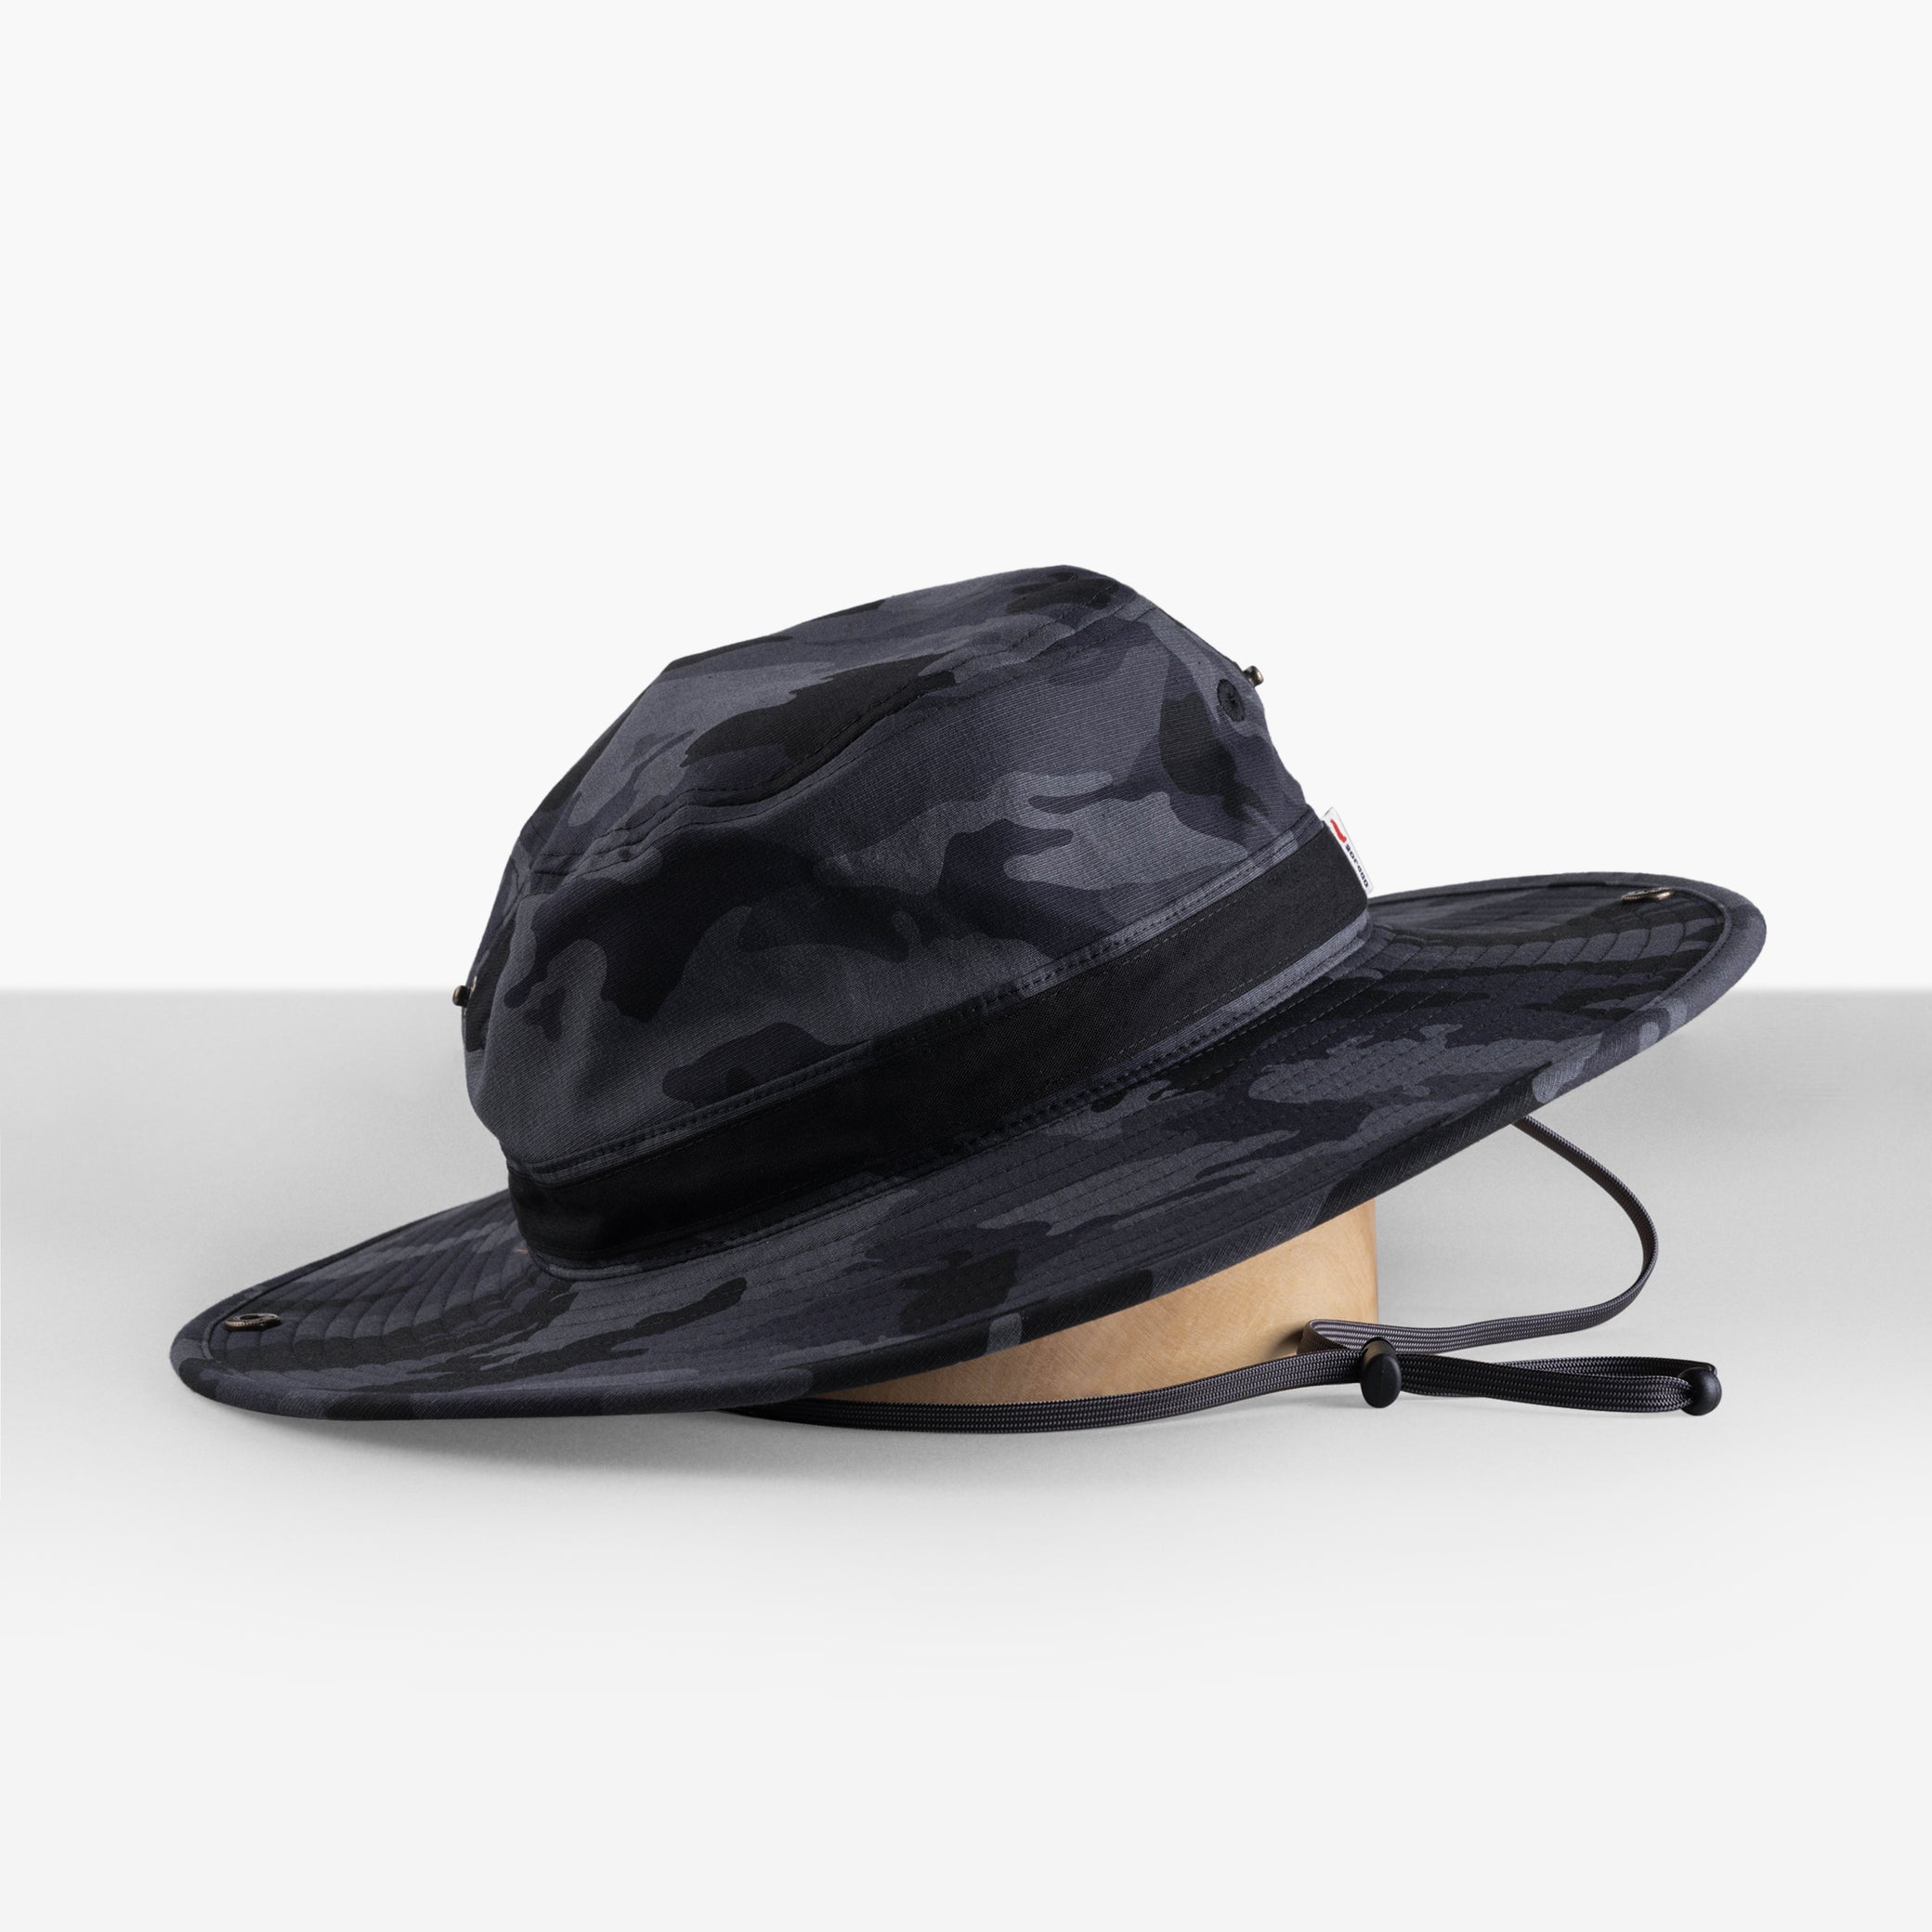 Oddjob Hats for Big Heads Men's Bucket Hats Extra Large, XL to XXL